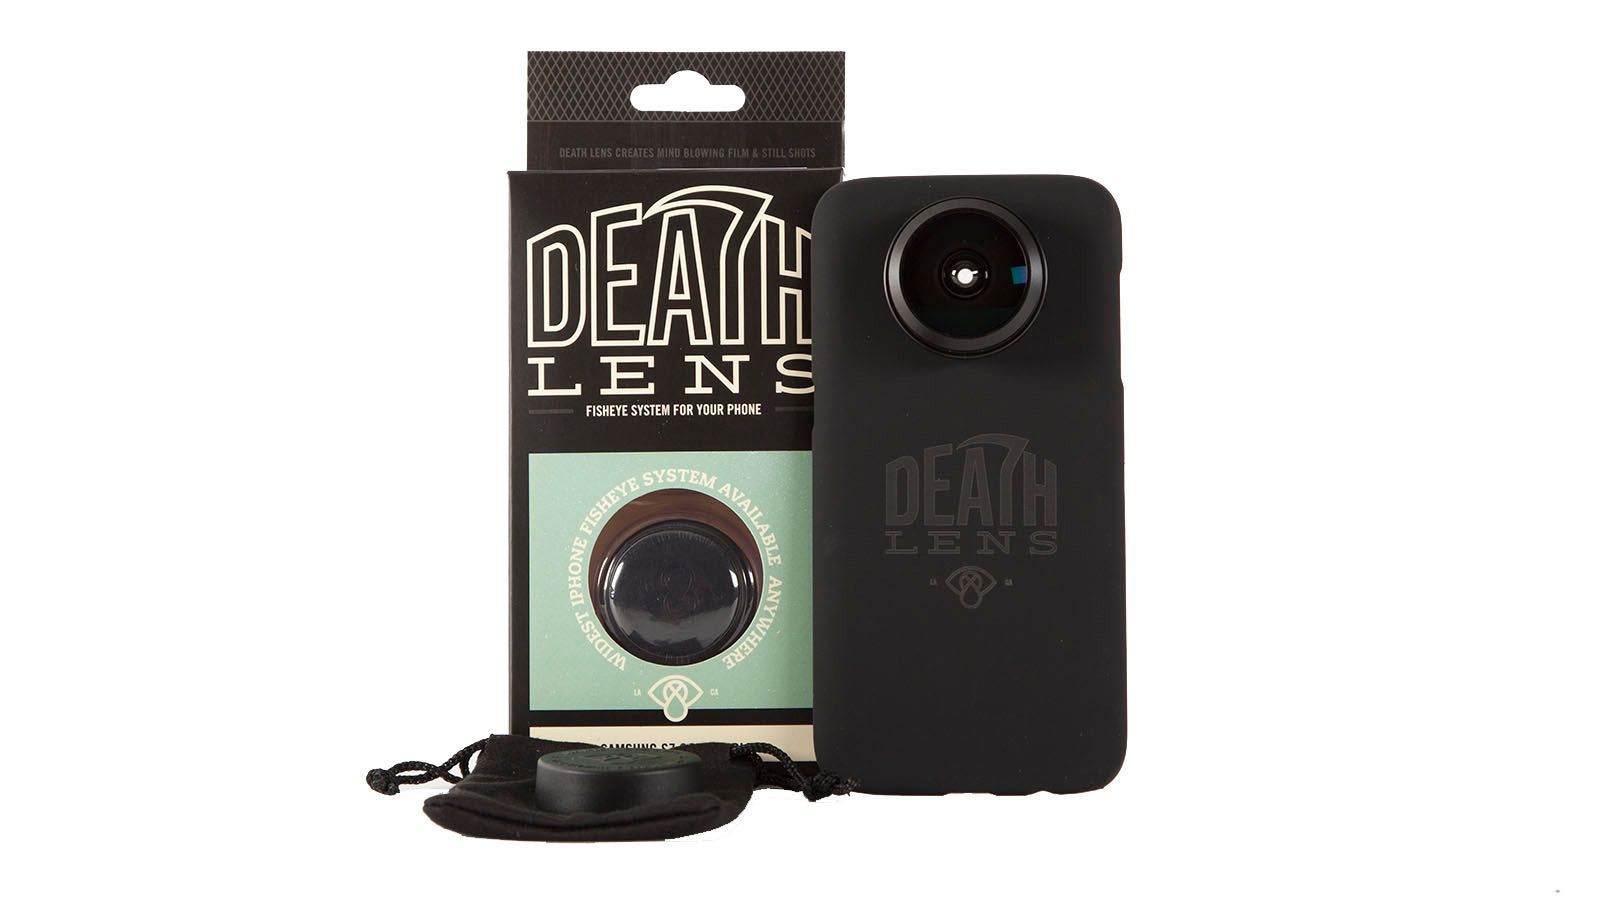 DEATHLENS SAMSUNG S7 FISHEYE LENS   MARKED DOWN FROM $ 8 TO $ 0.00